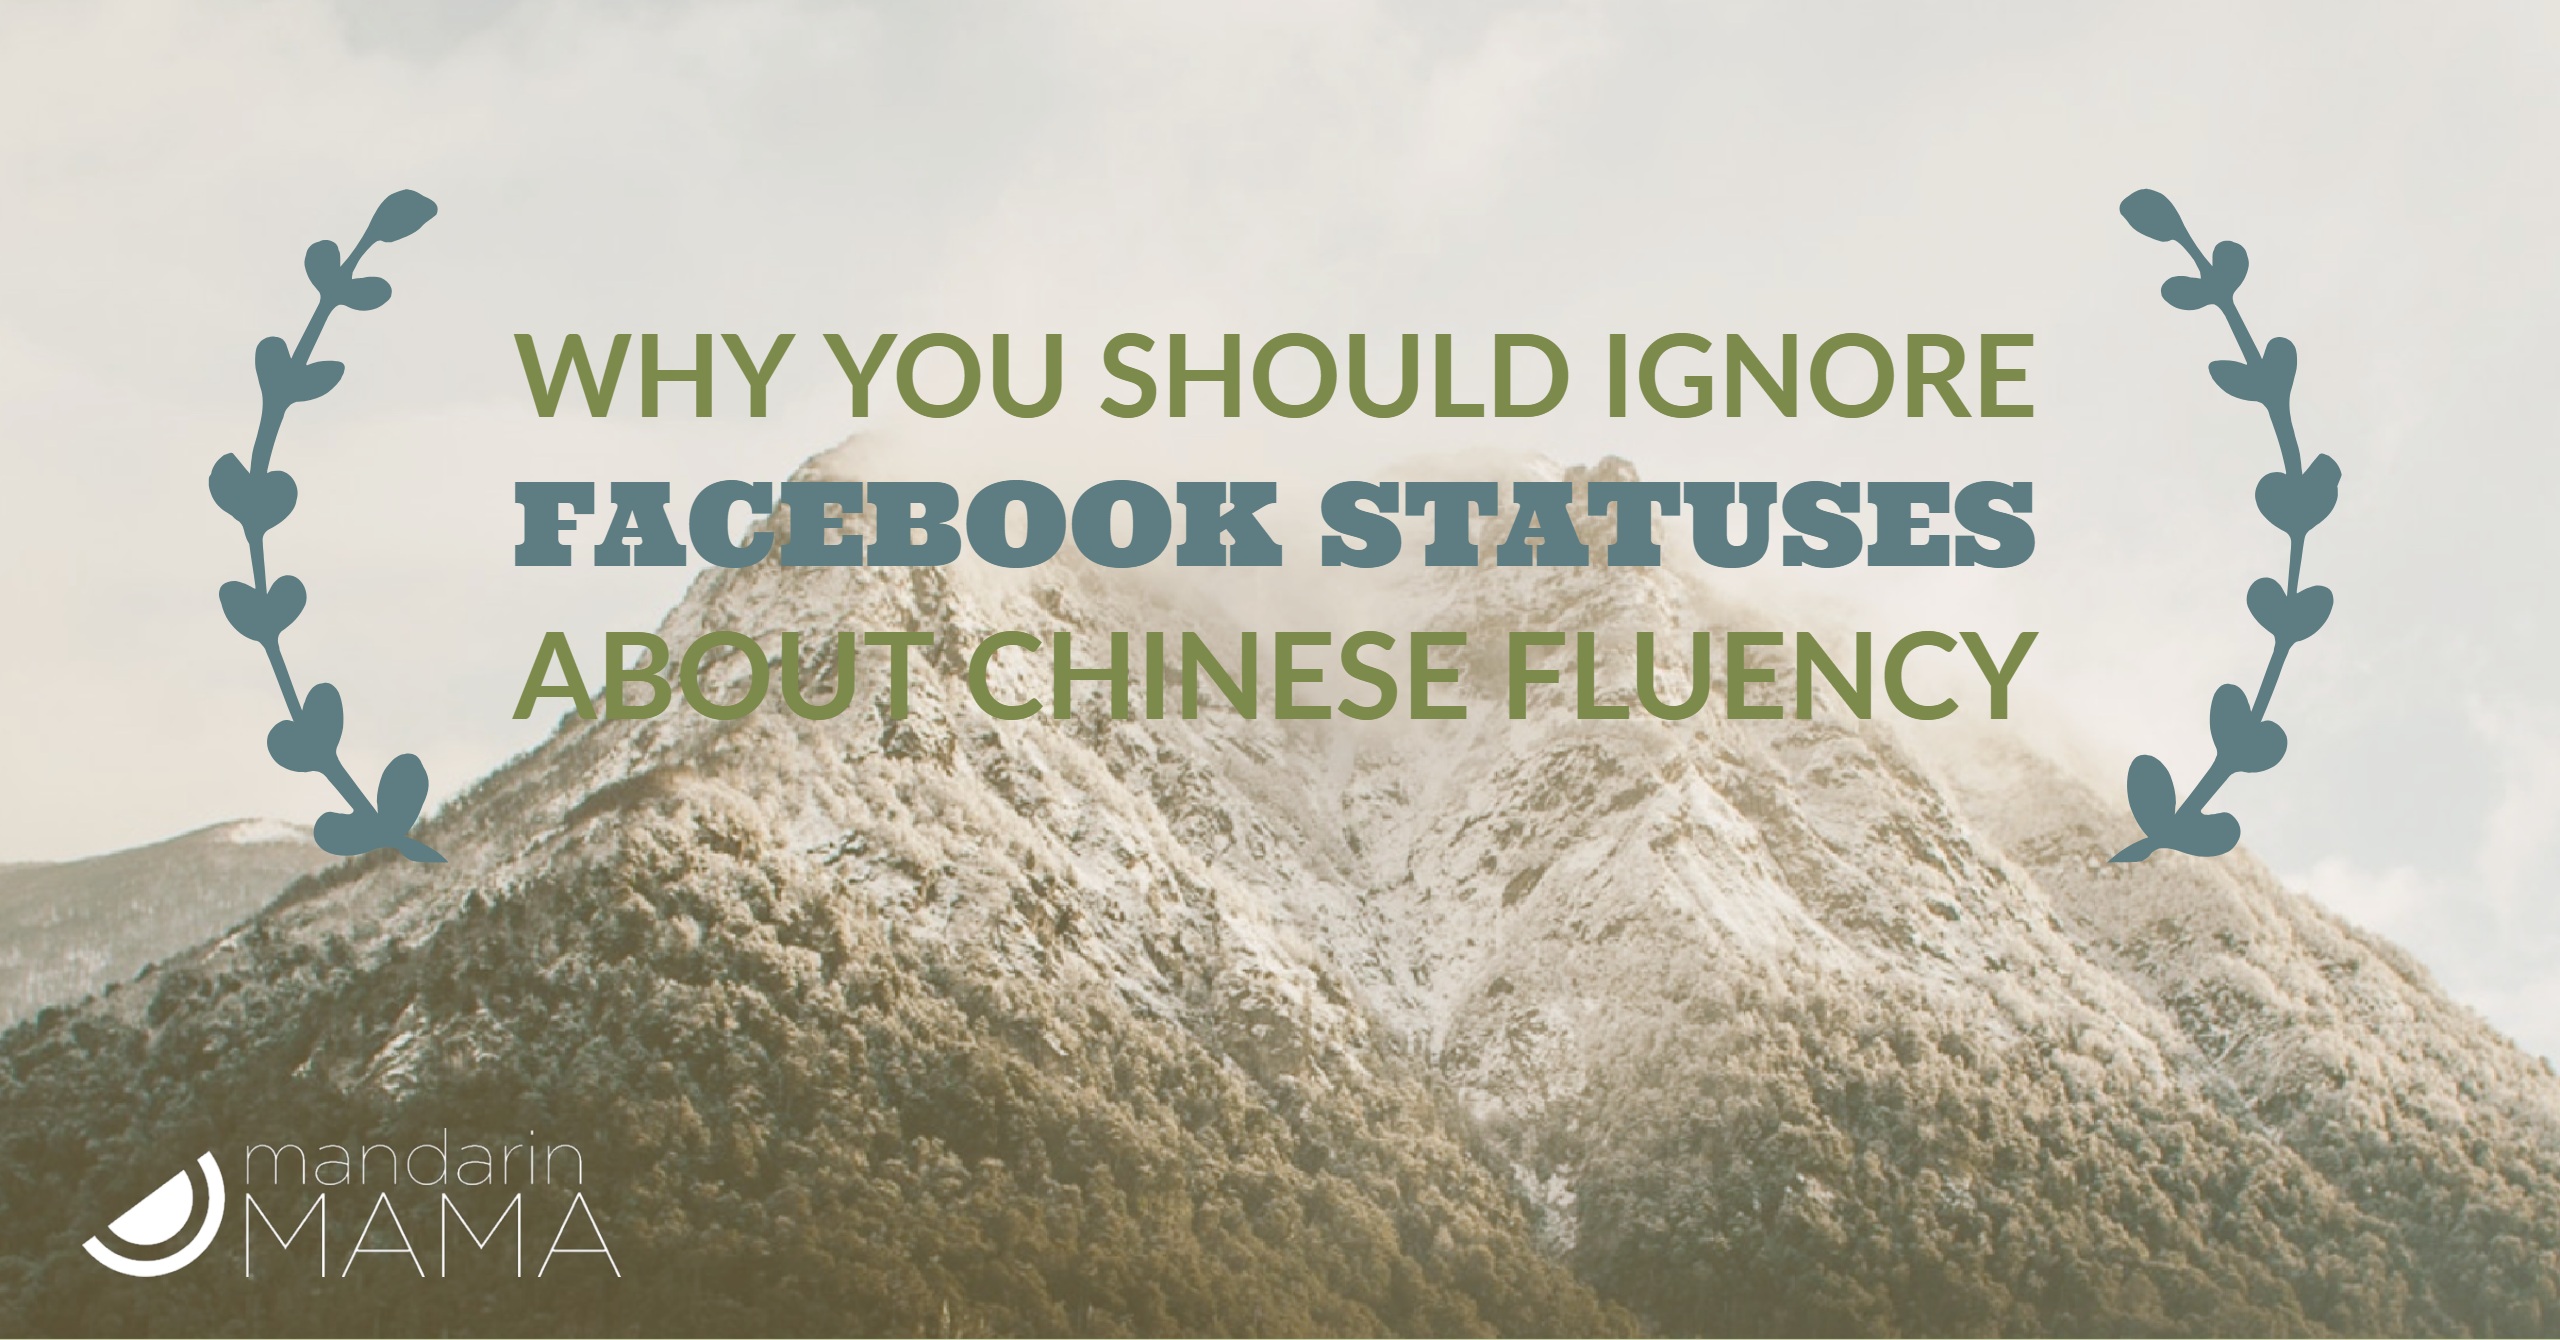 Why You Should Ignore Facebook Statuses about Chinese Fluency